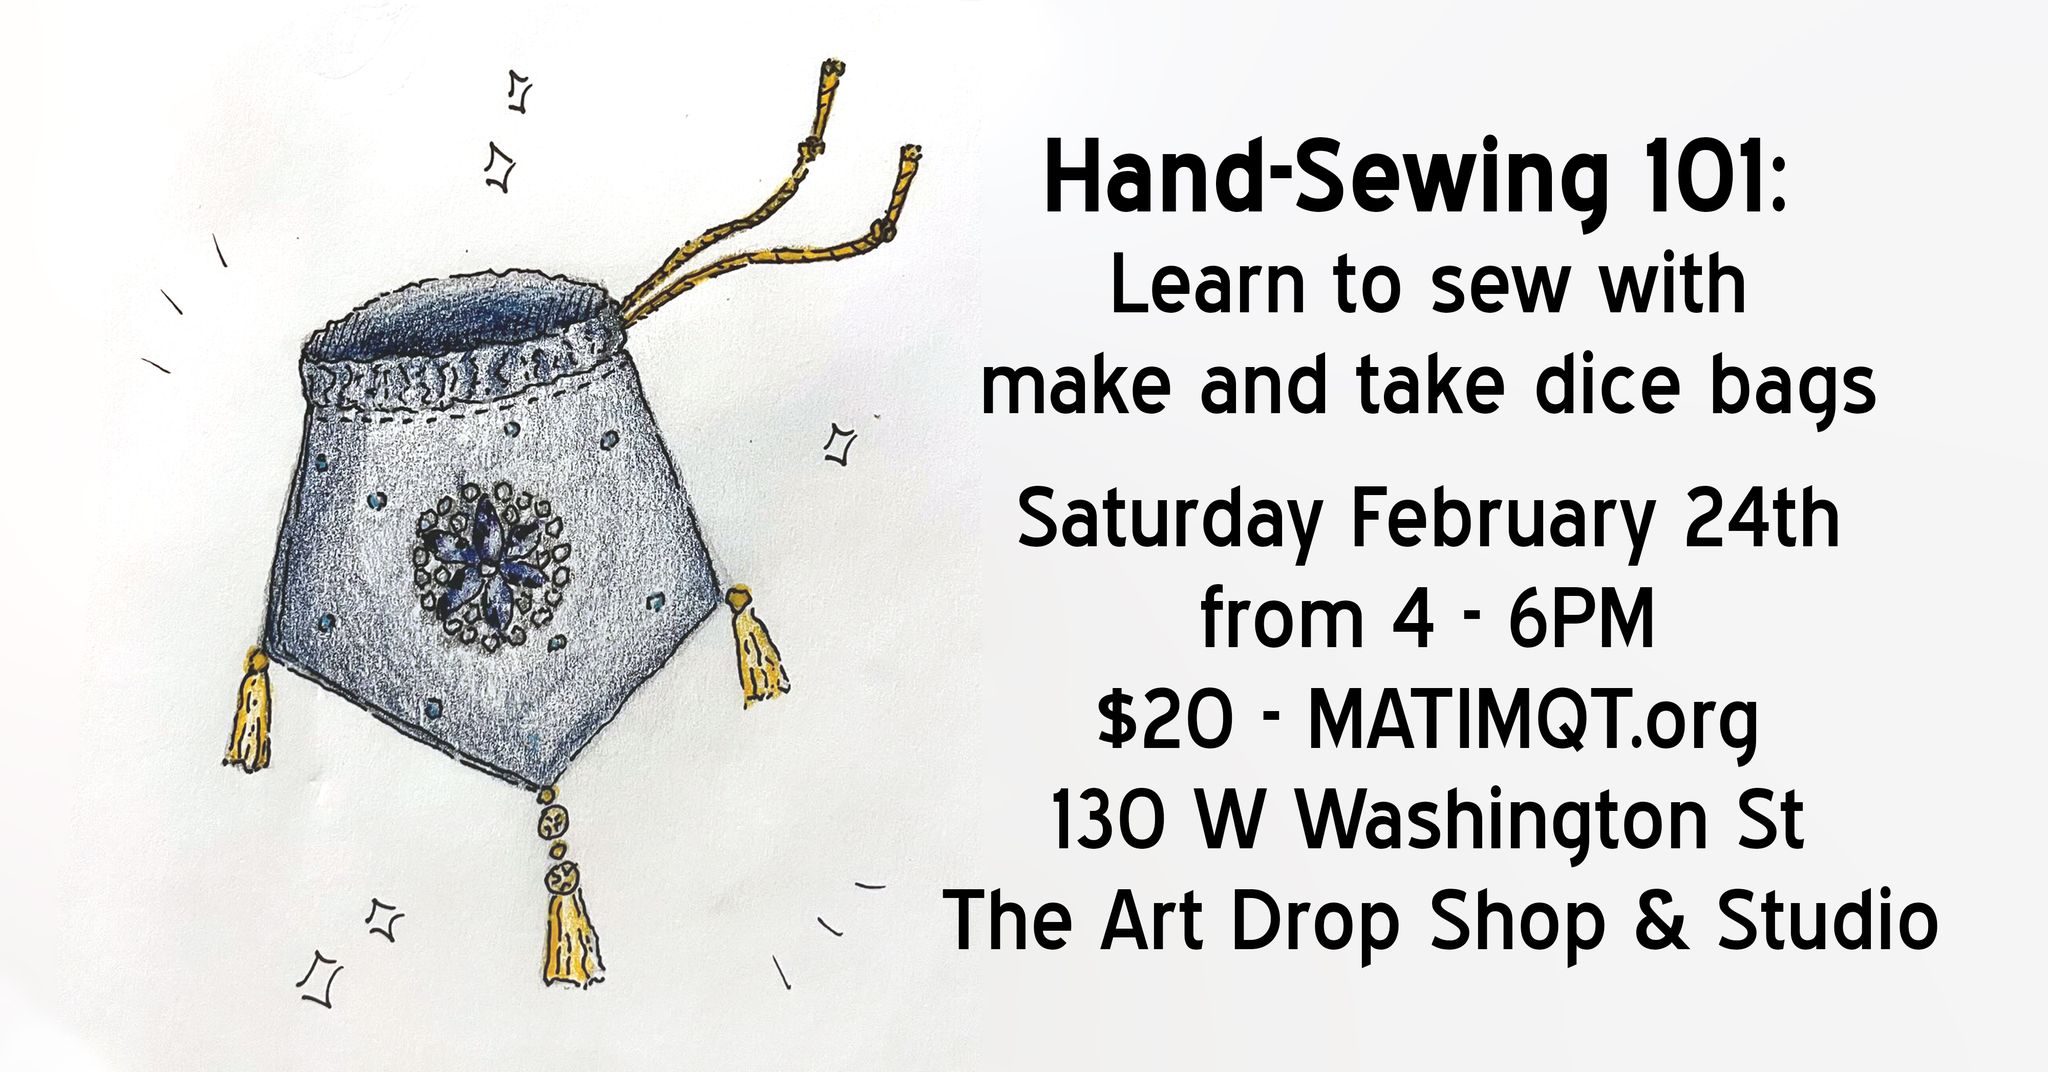 Hand-Sewing 101 Marquette workshop at The Art Drop Shop & Studio